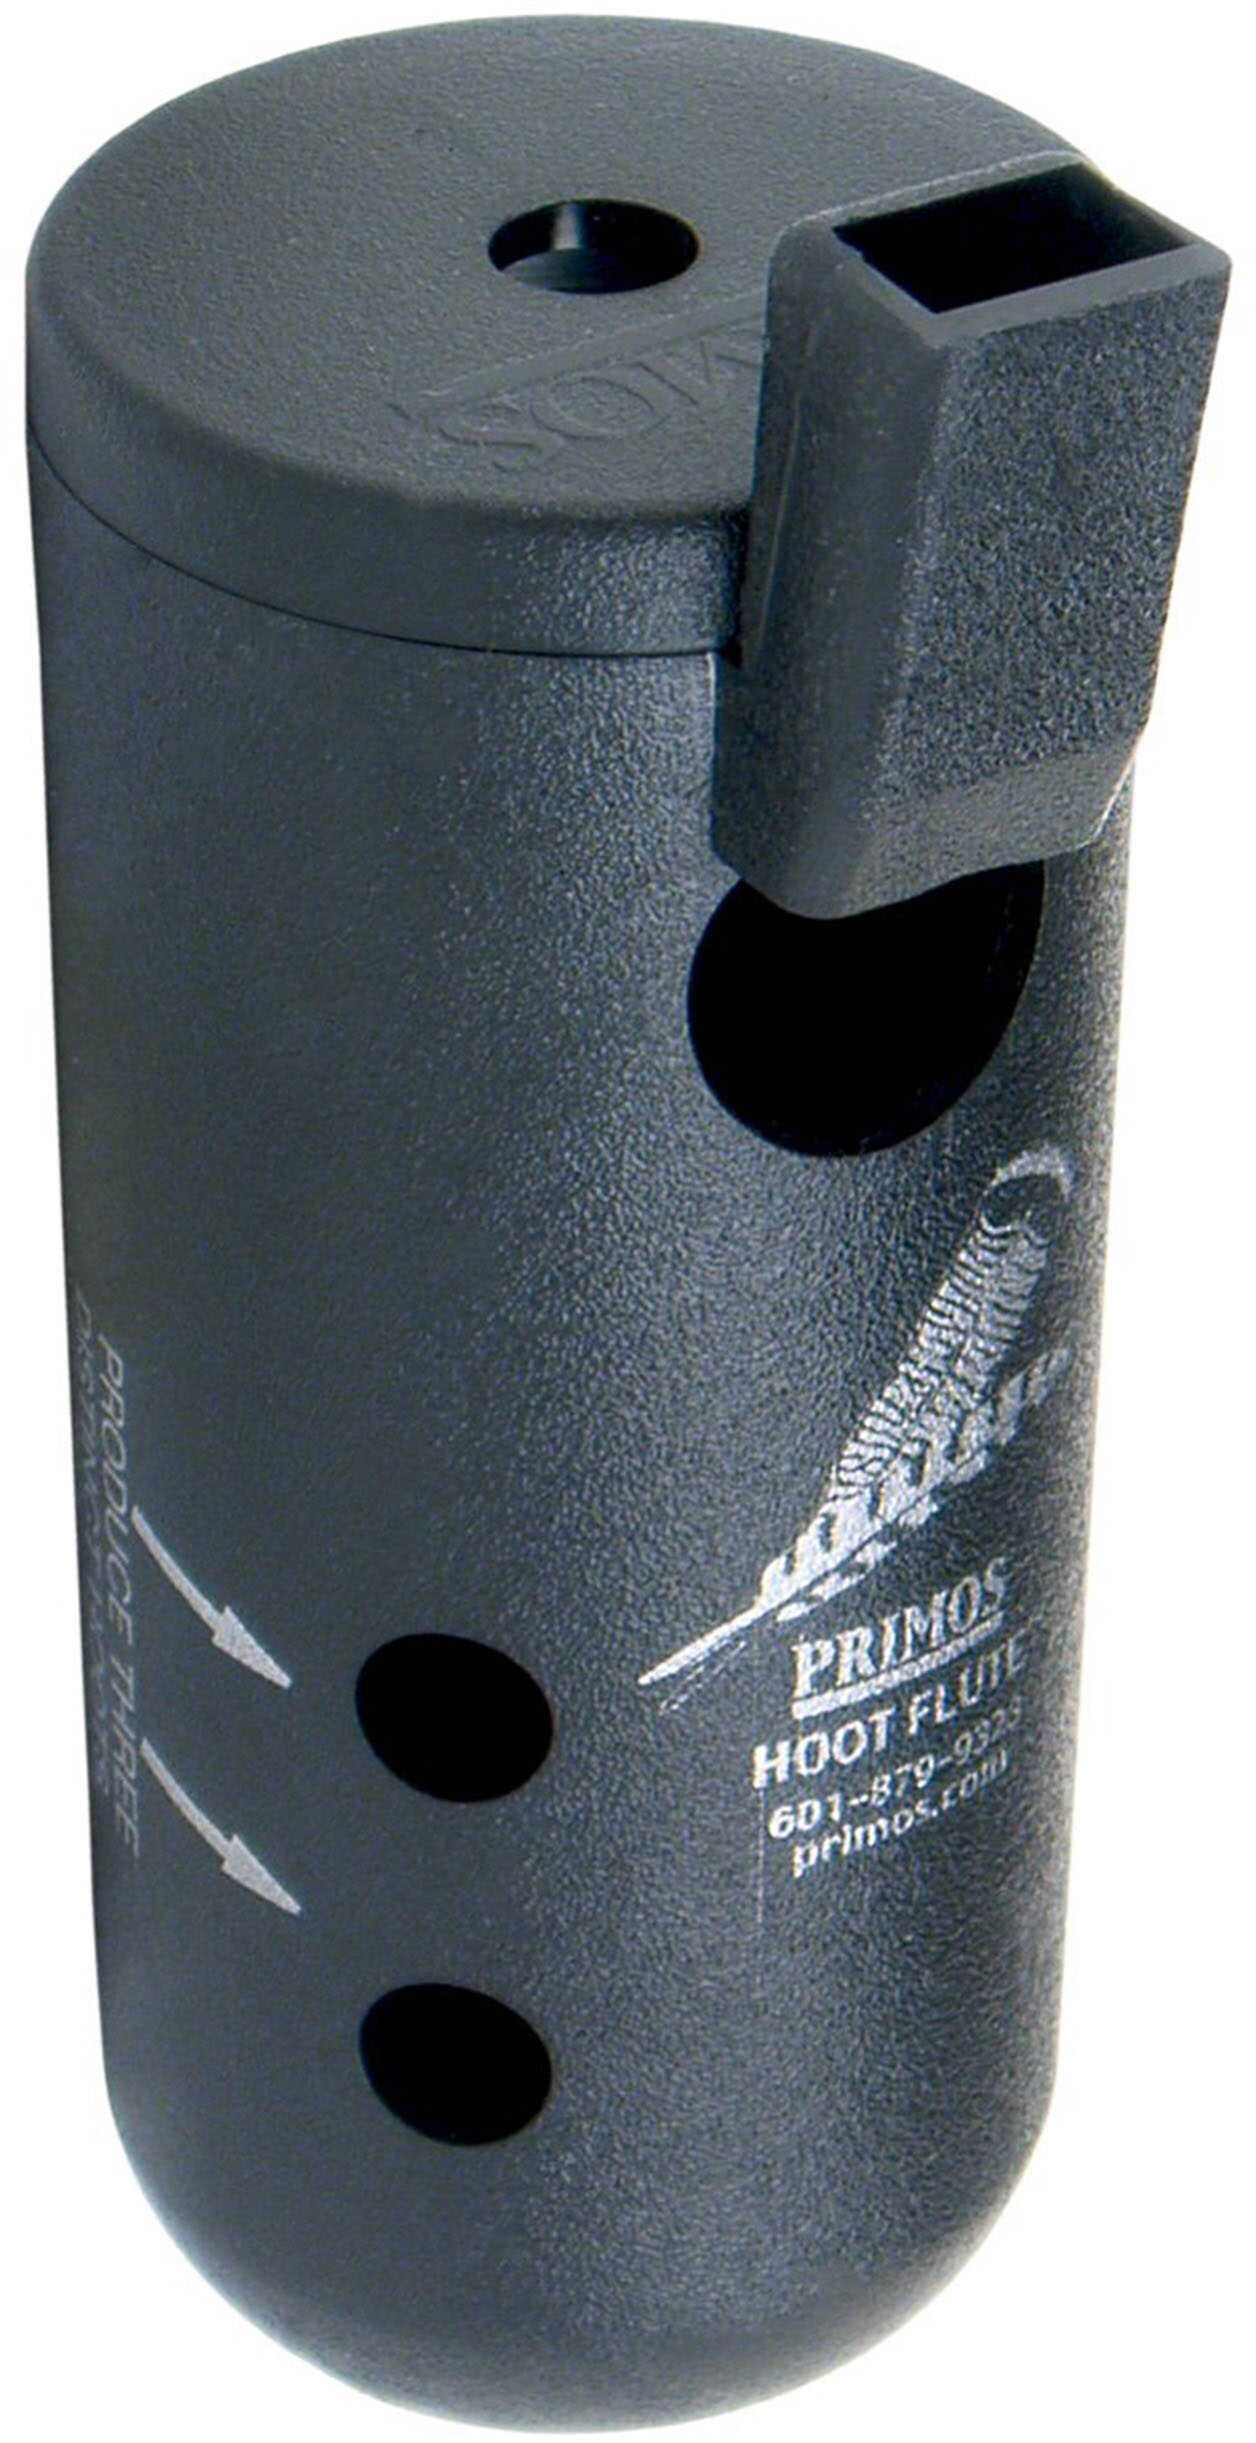 Primos Locator Call, Hoot Flute - Brand New In Package